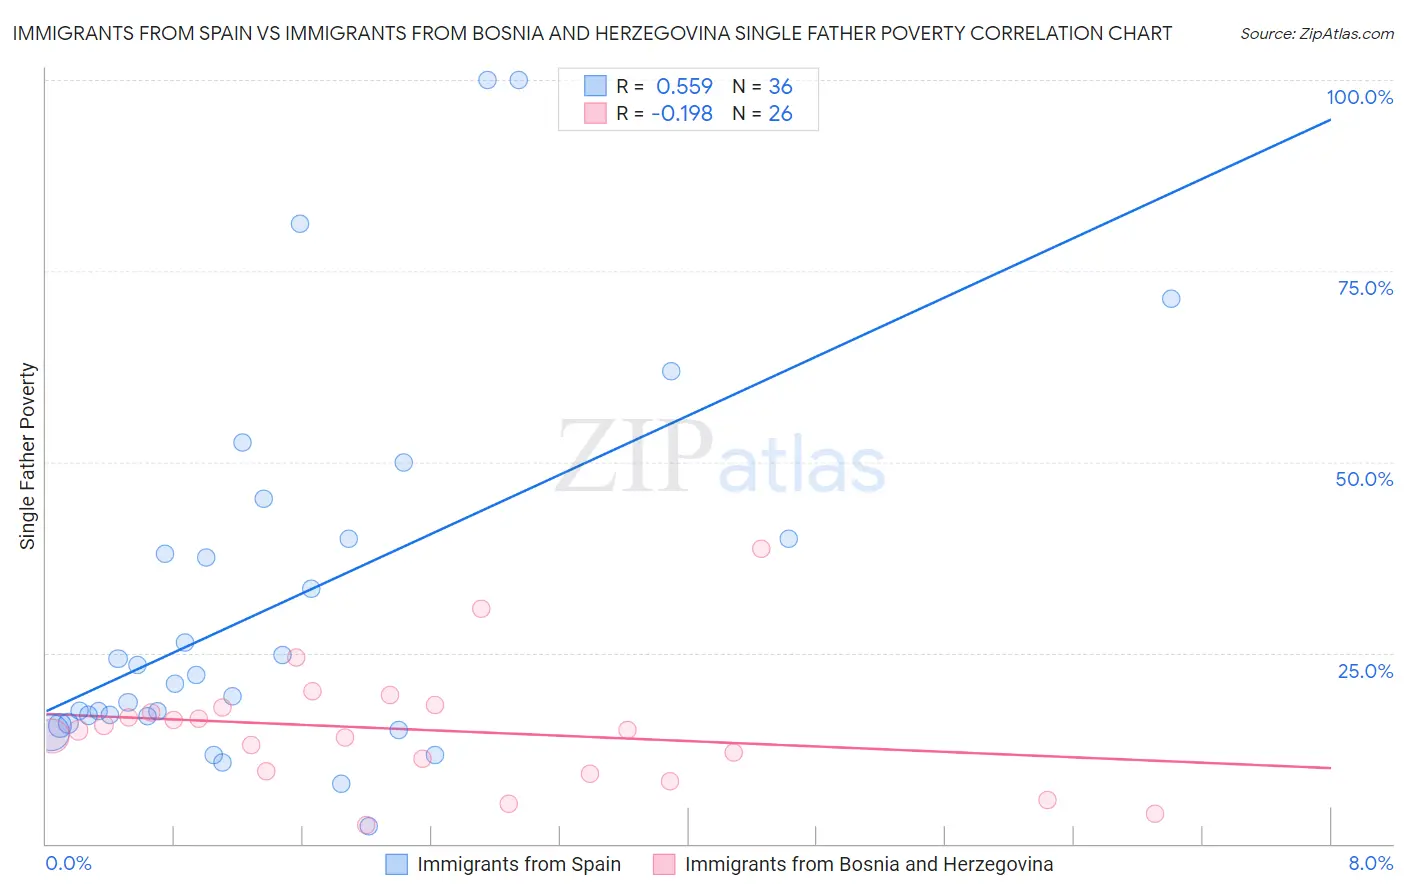 Immigrants from Spain vs Immigrants from Bosnia and Herzegovina Single Father Poverty